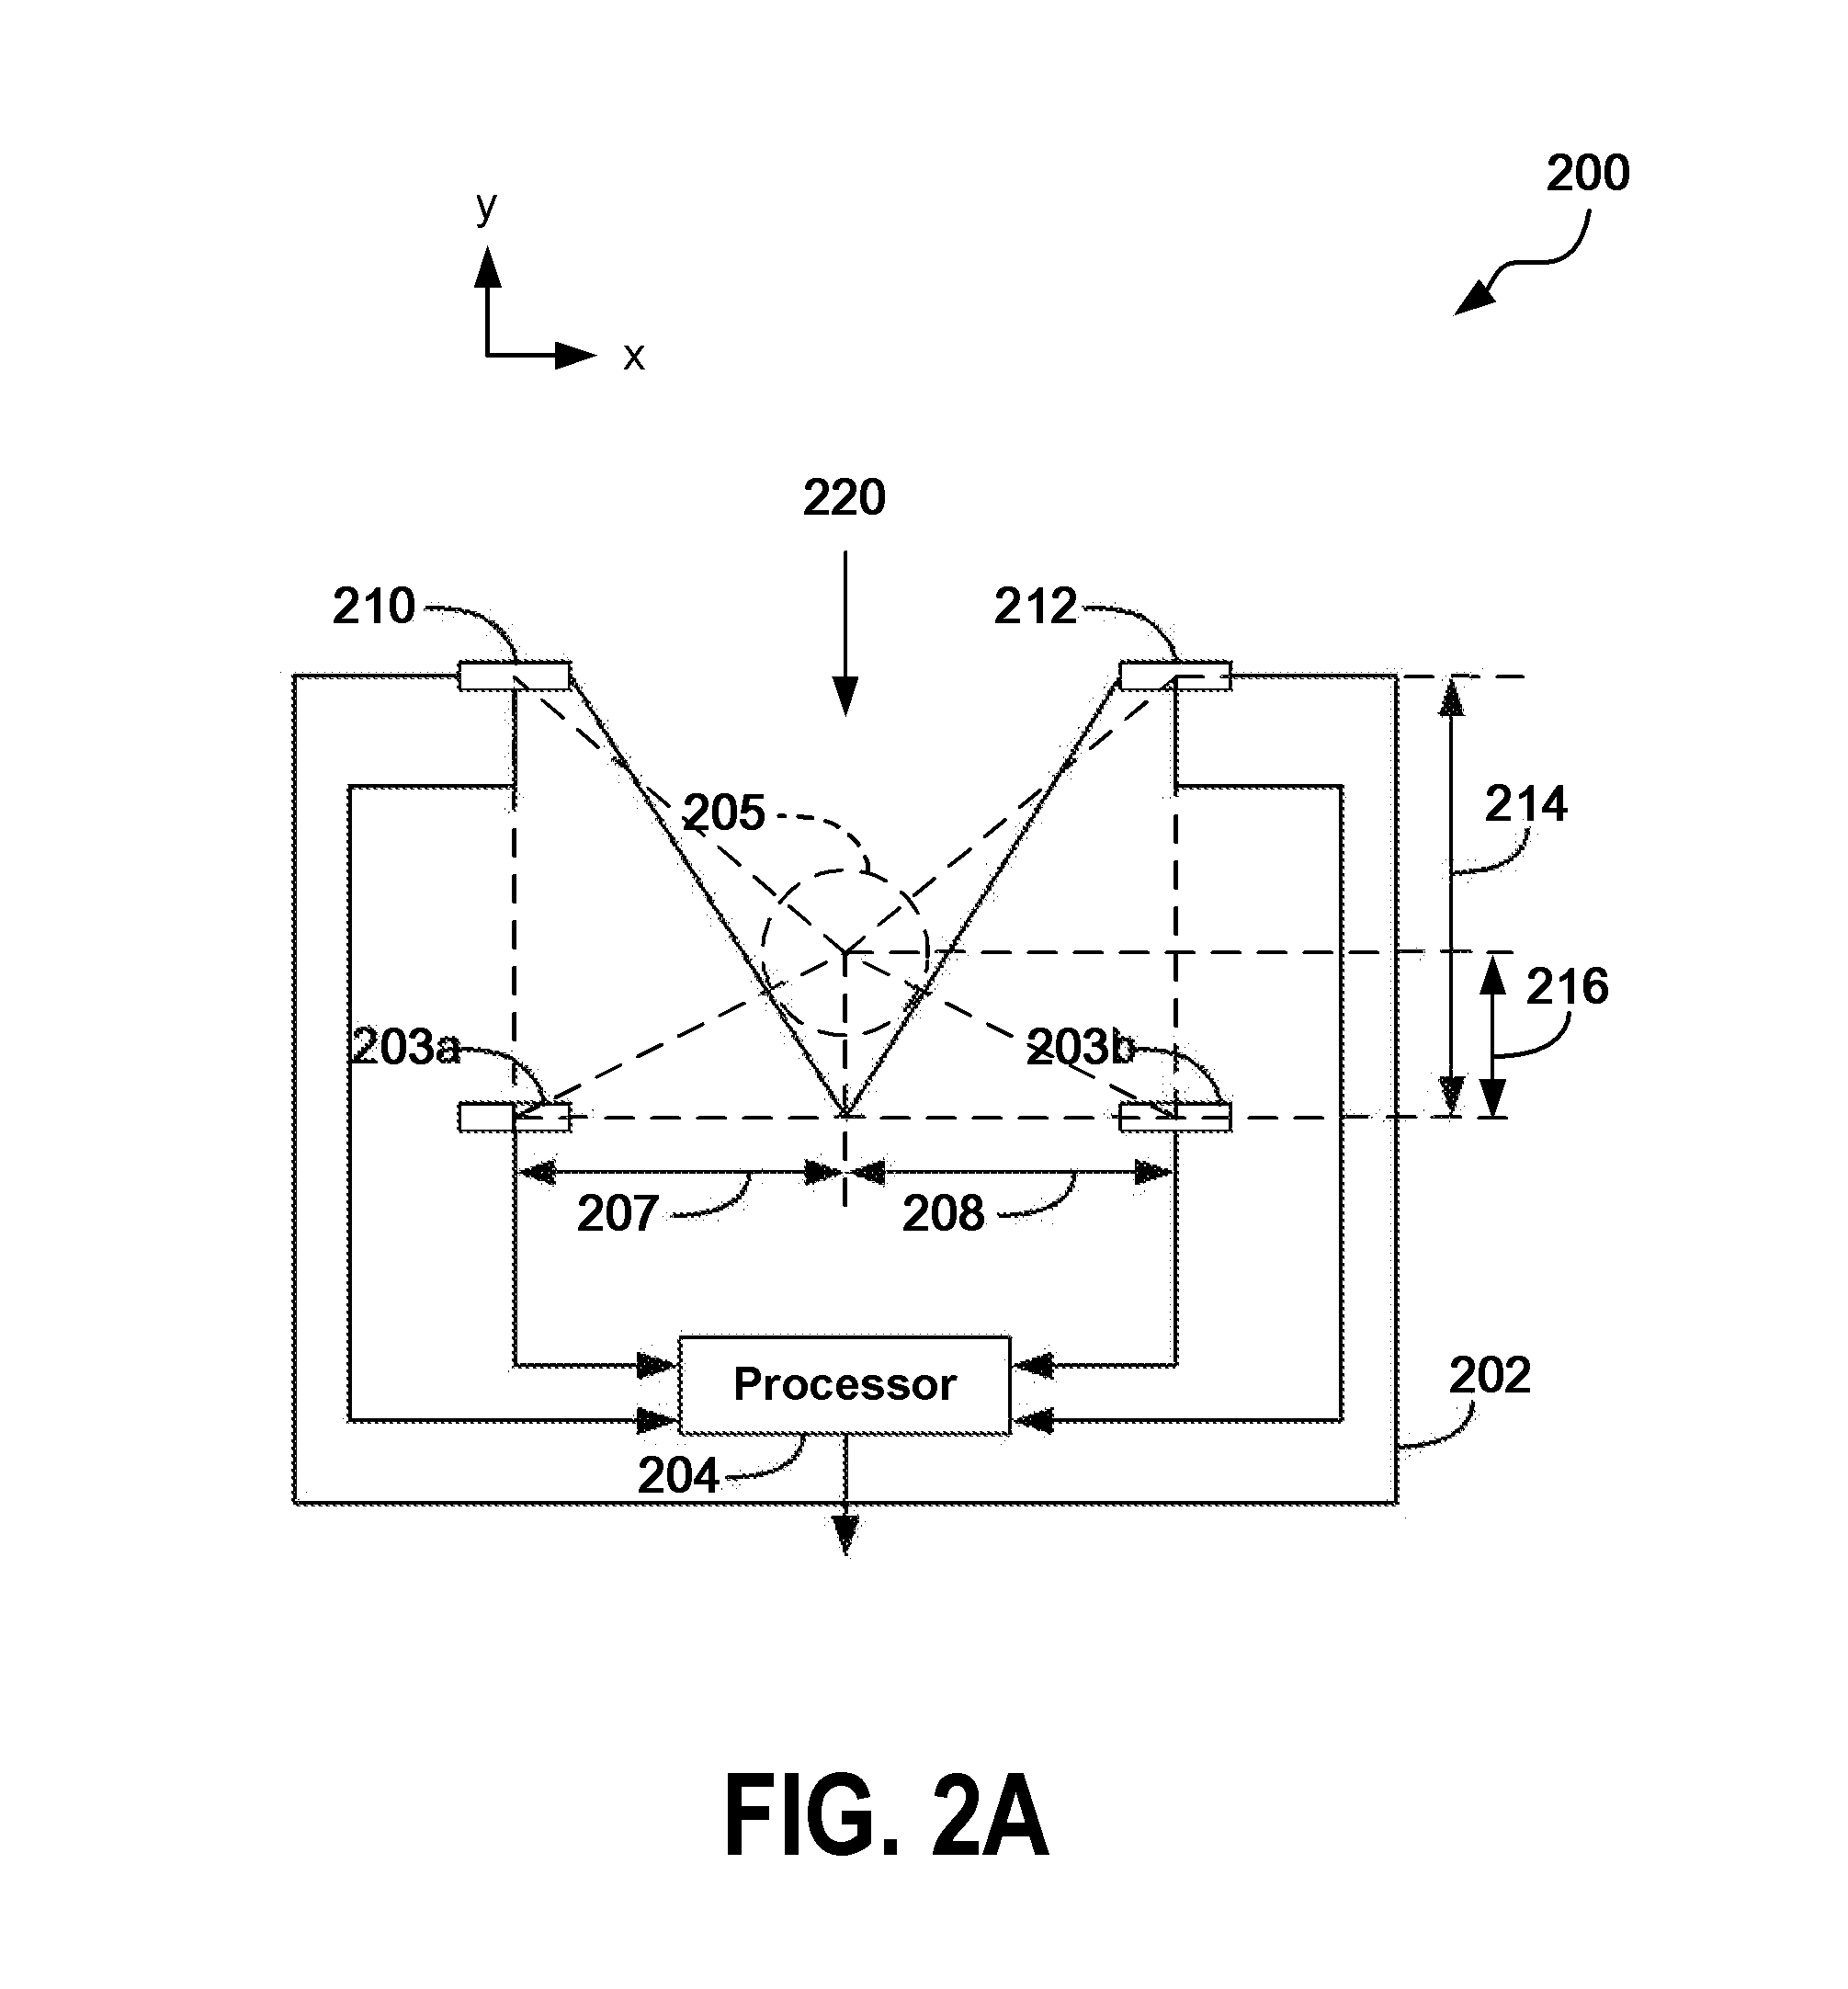 Apparatus and methods for measuring current